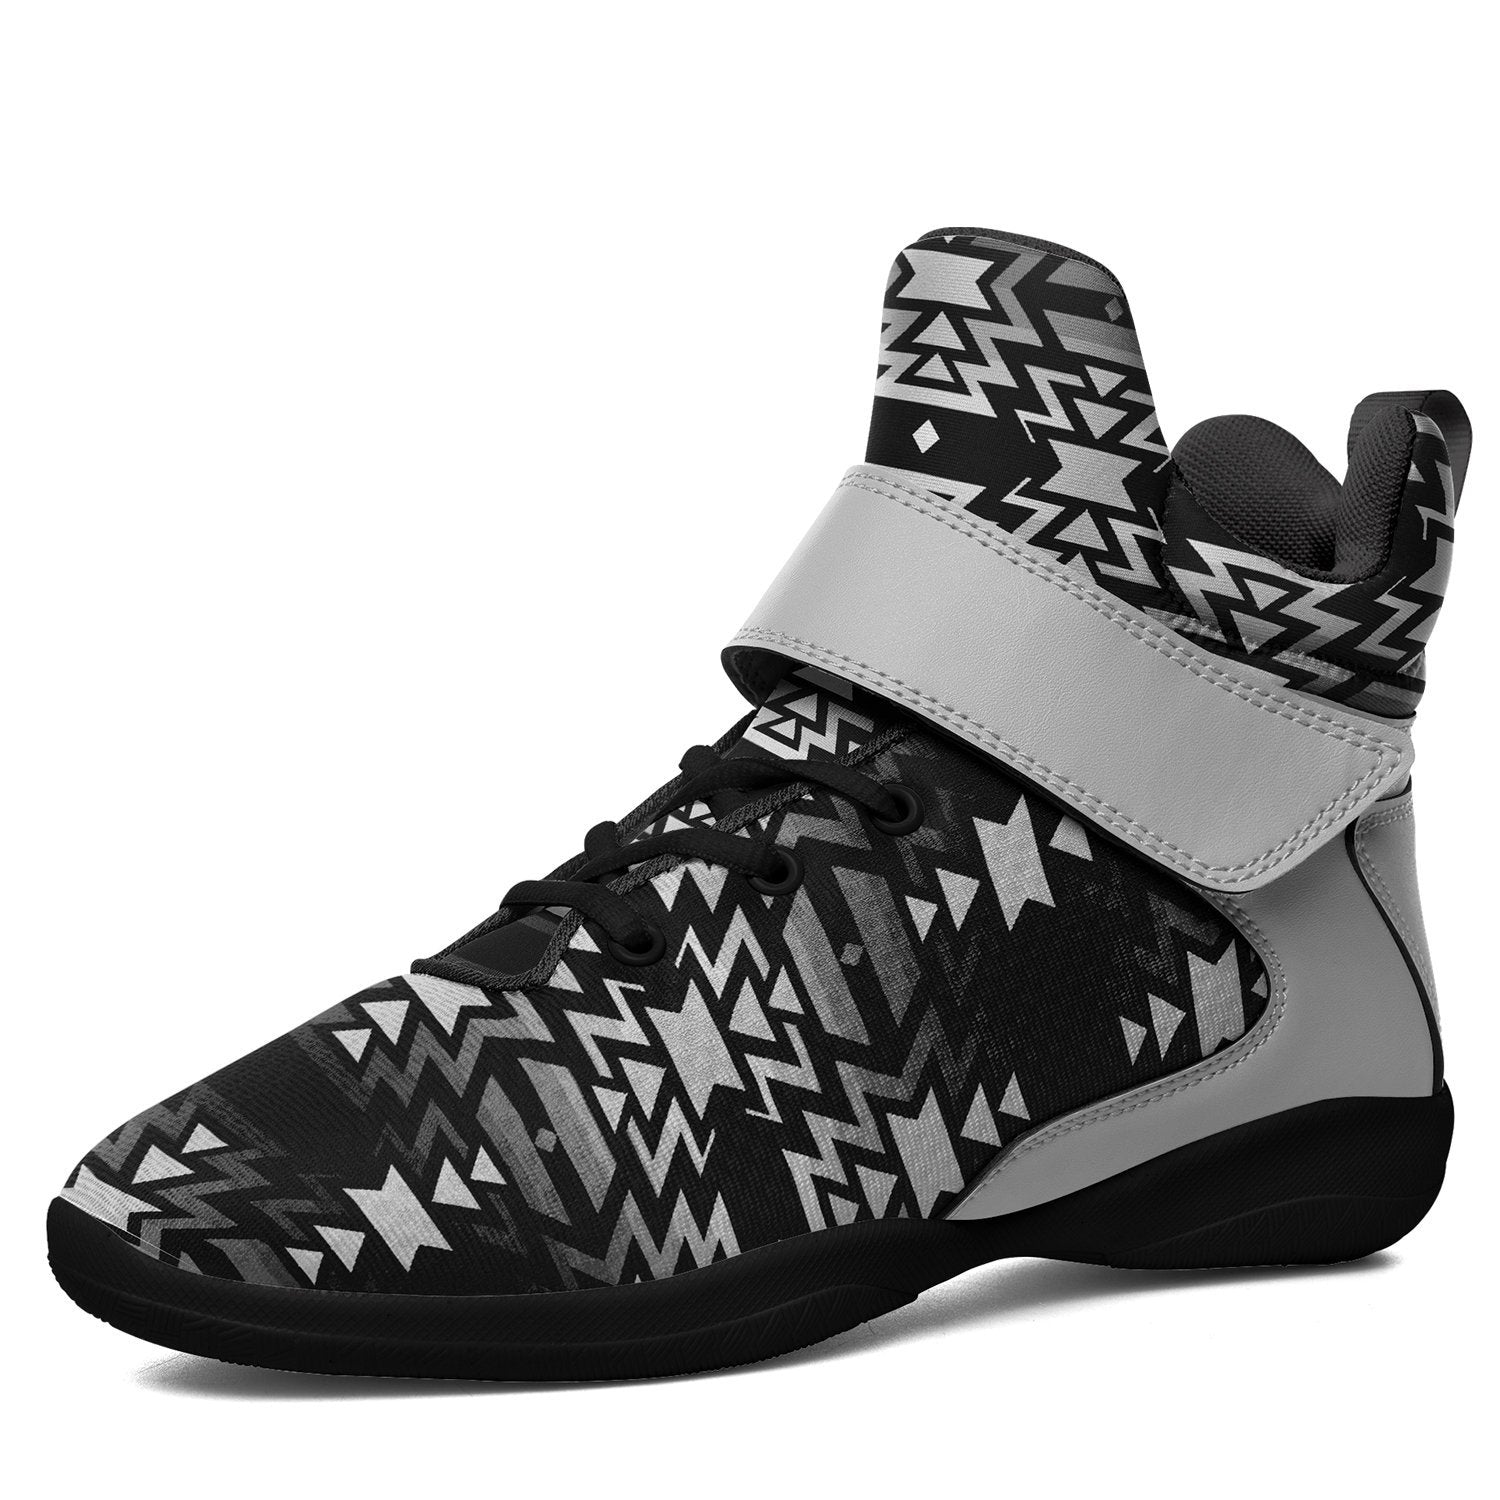 Black Fire Black and White Kid's Ipottaa Basketball / Sport High Top Shoes 49 Dzine US Women 4.5 / US Youth 3.5 / EUR 35 Black Sole with Gray Strap 